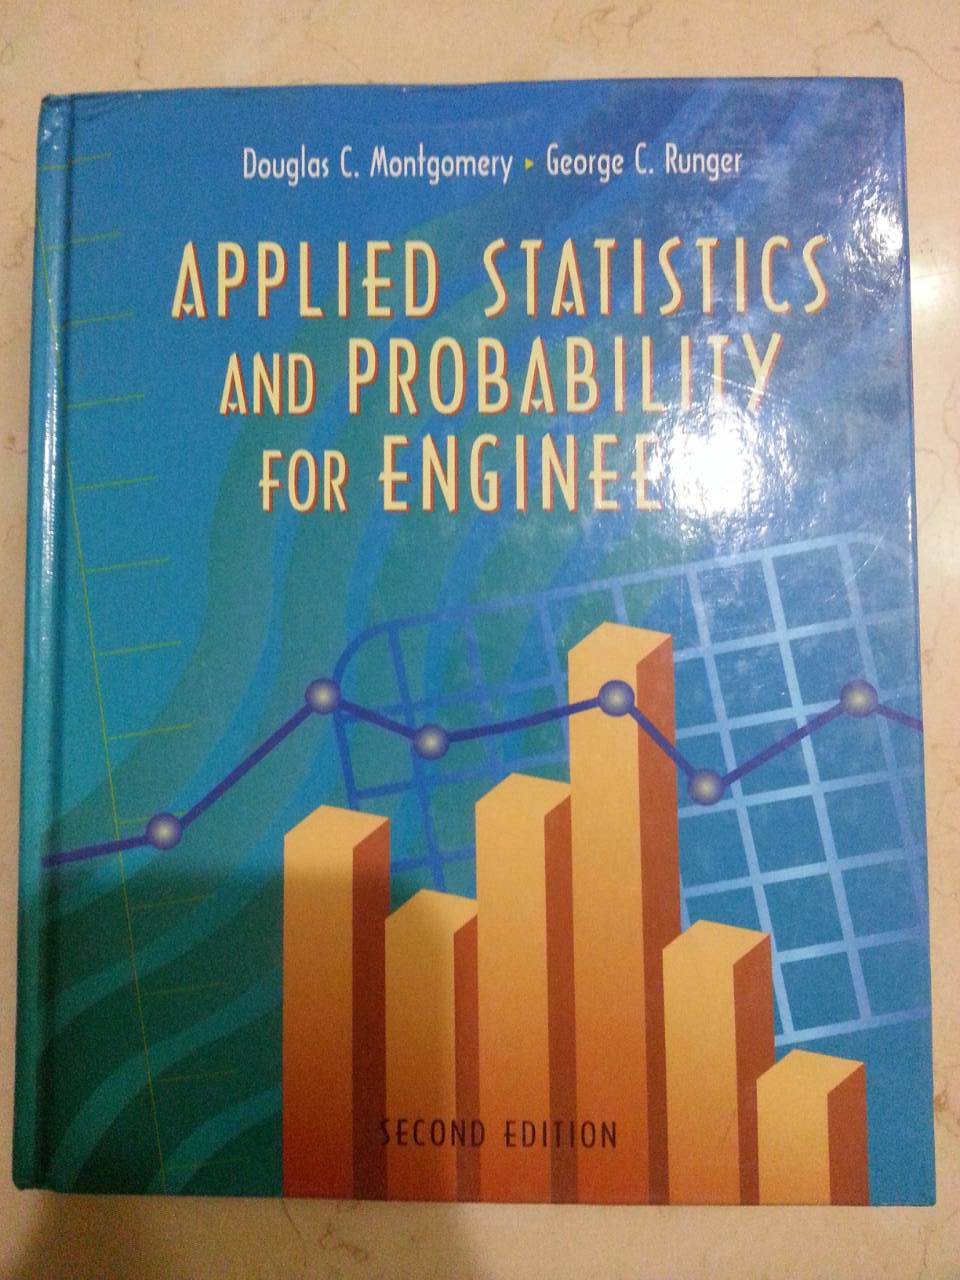 Applied Statistics and Probability for Engineers 詳細資料